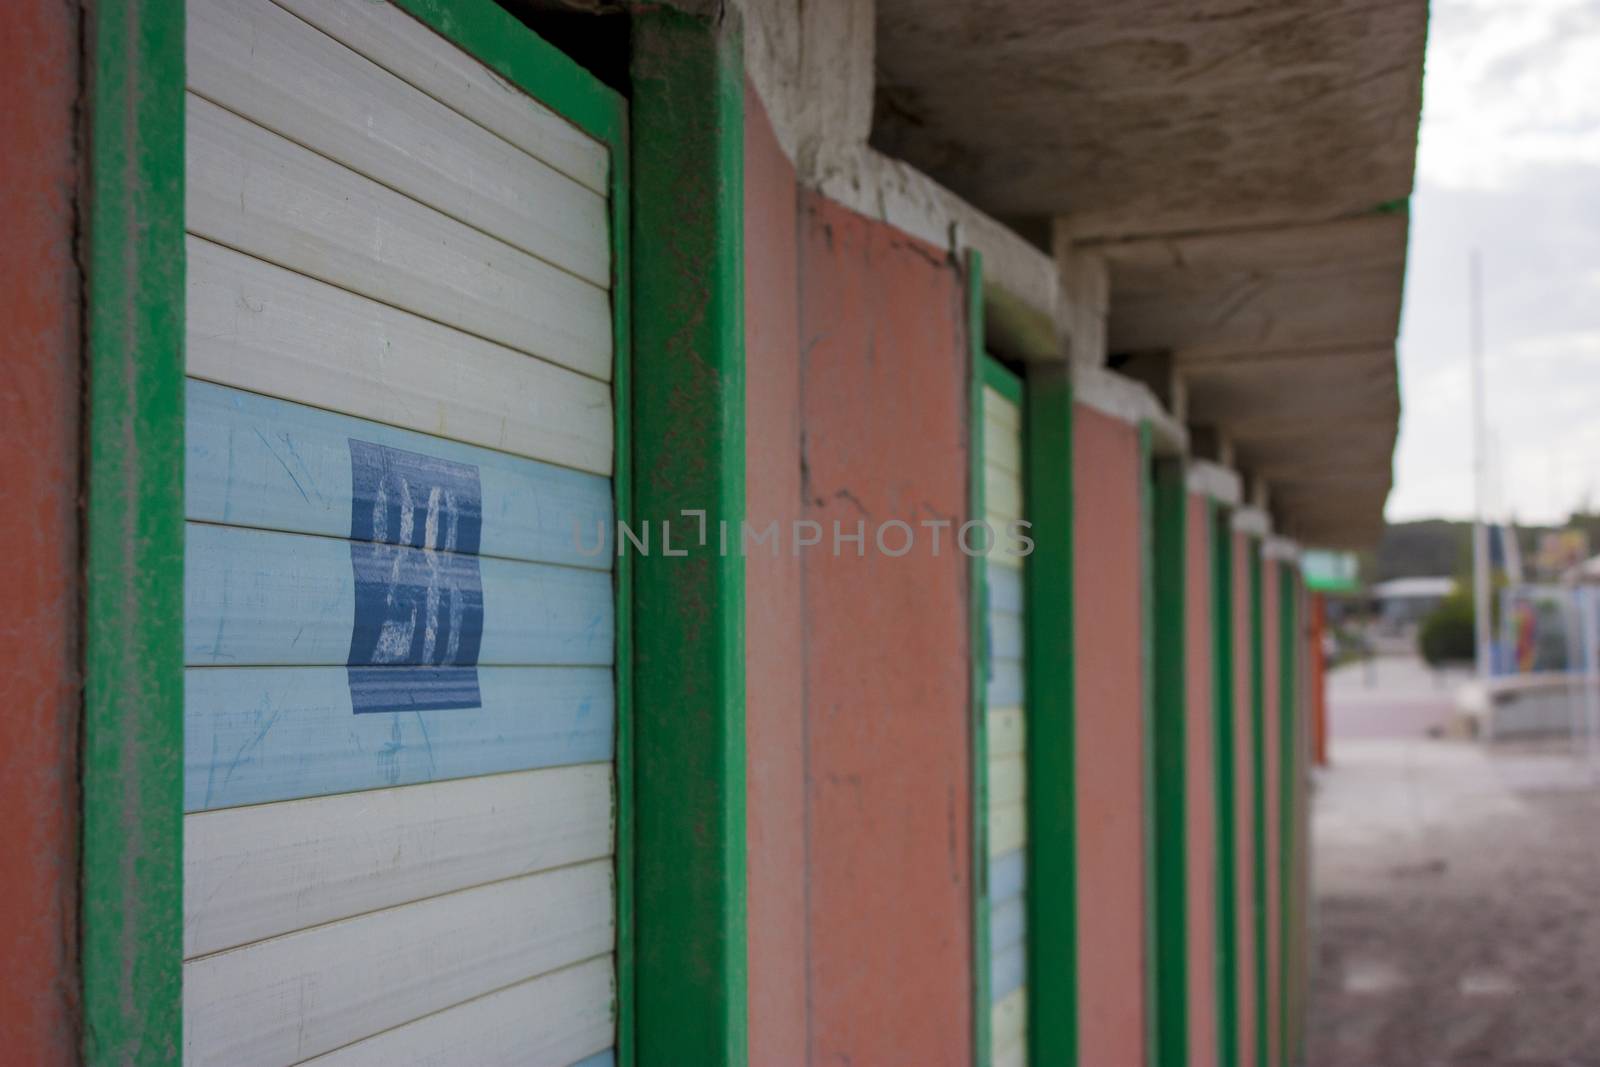 Walk-in closet of a beach during winter by pippocarlot